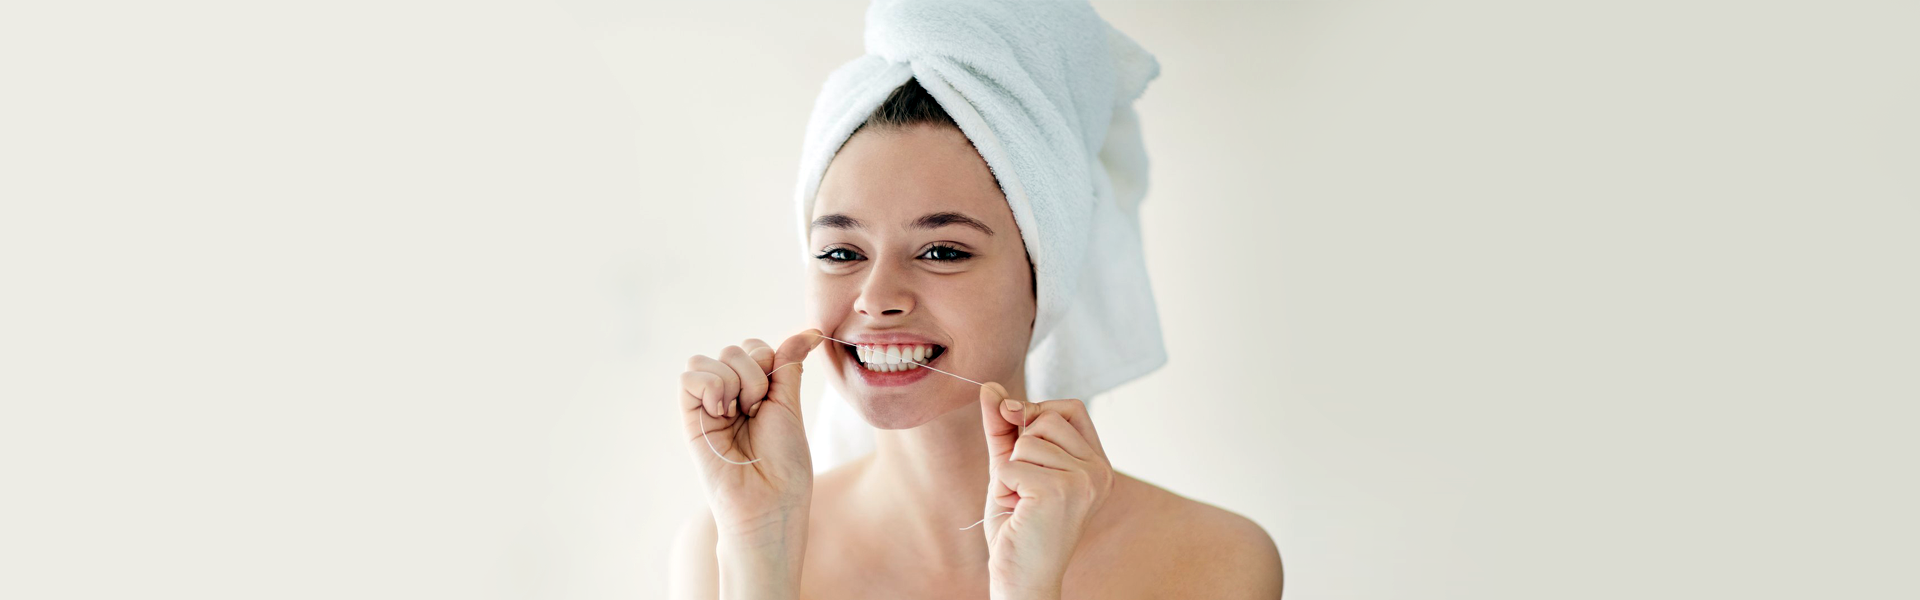 Improve Your Brushing & Flossing with These Tips